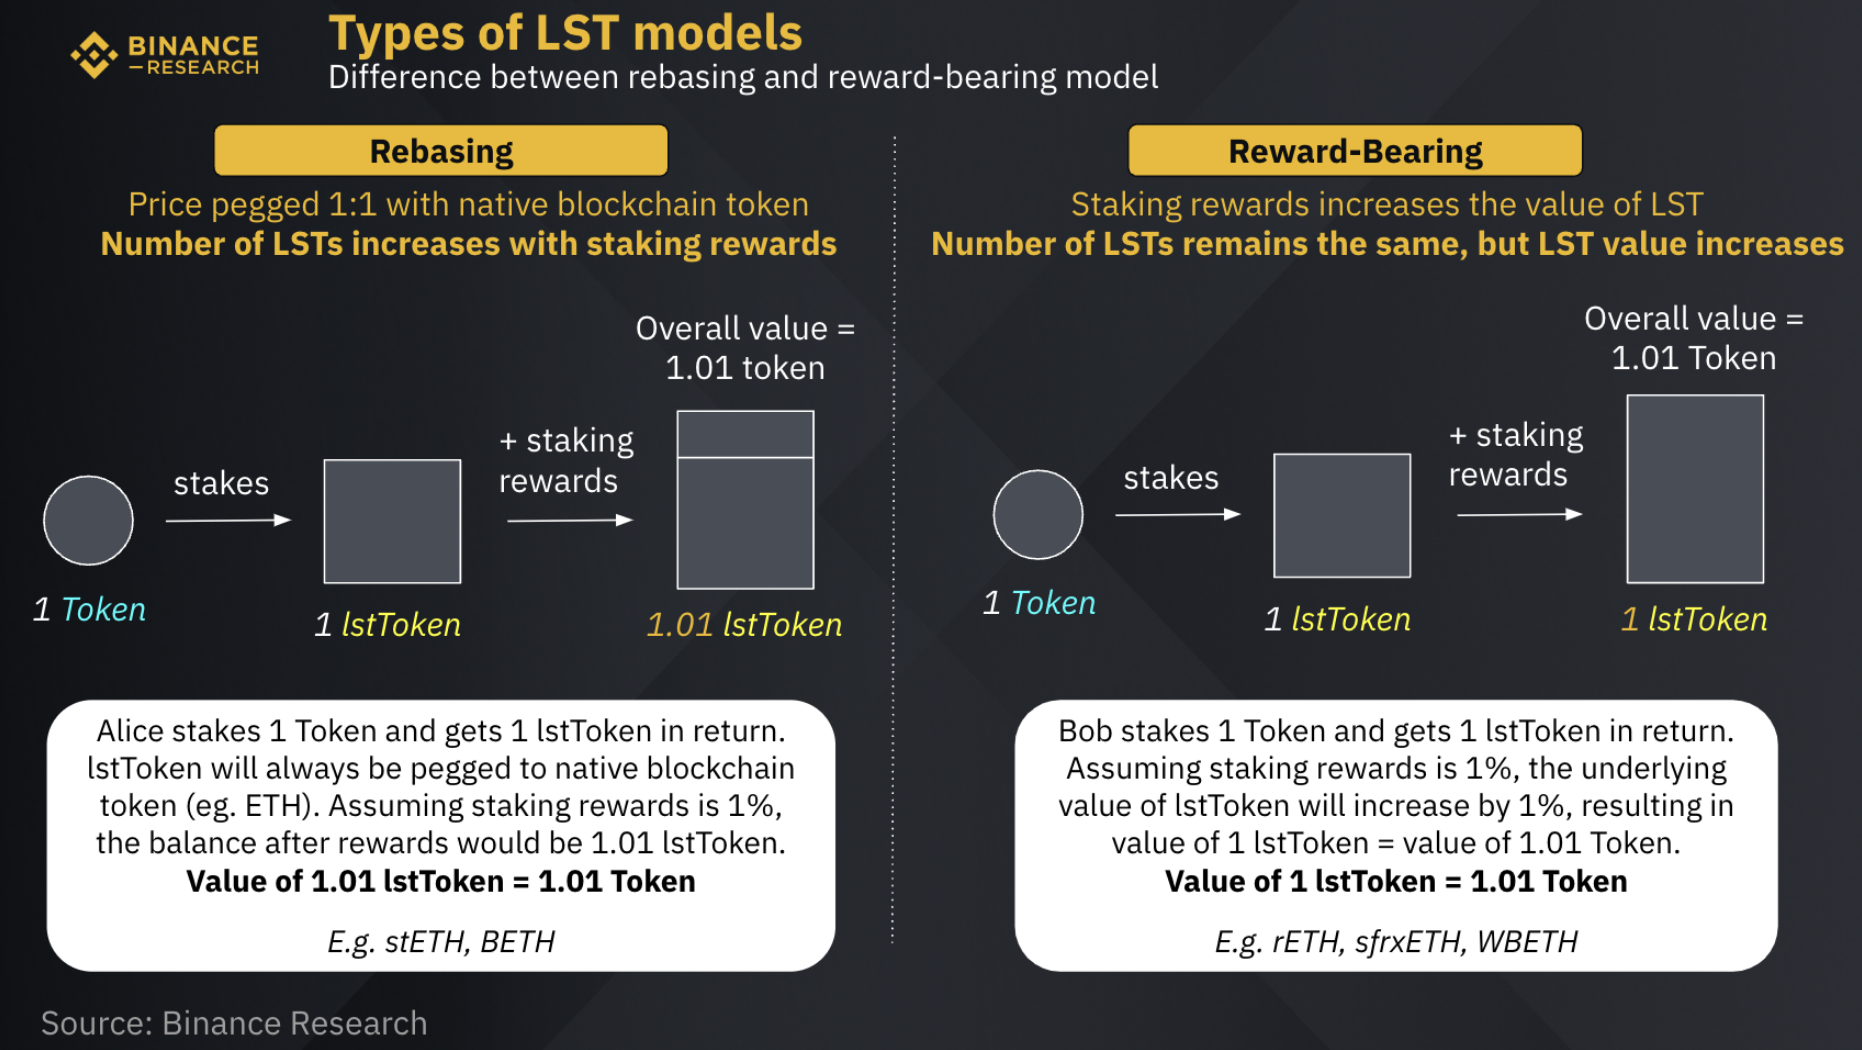 An excellent graphic on the difference between the 2, courtesy of Binance Research.